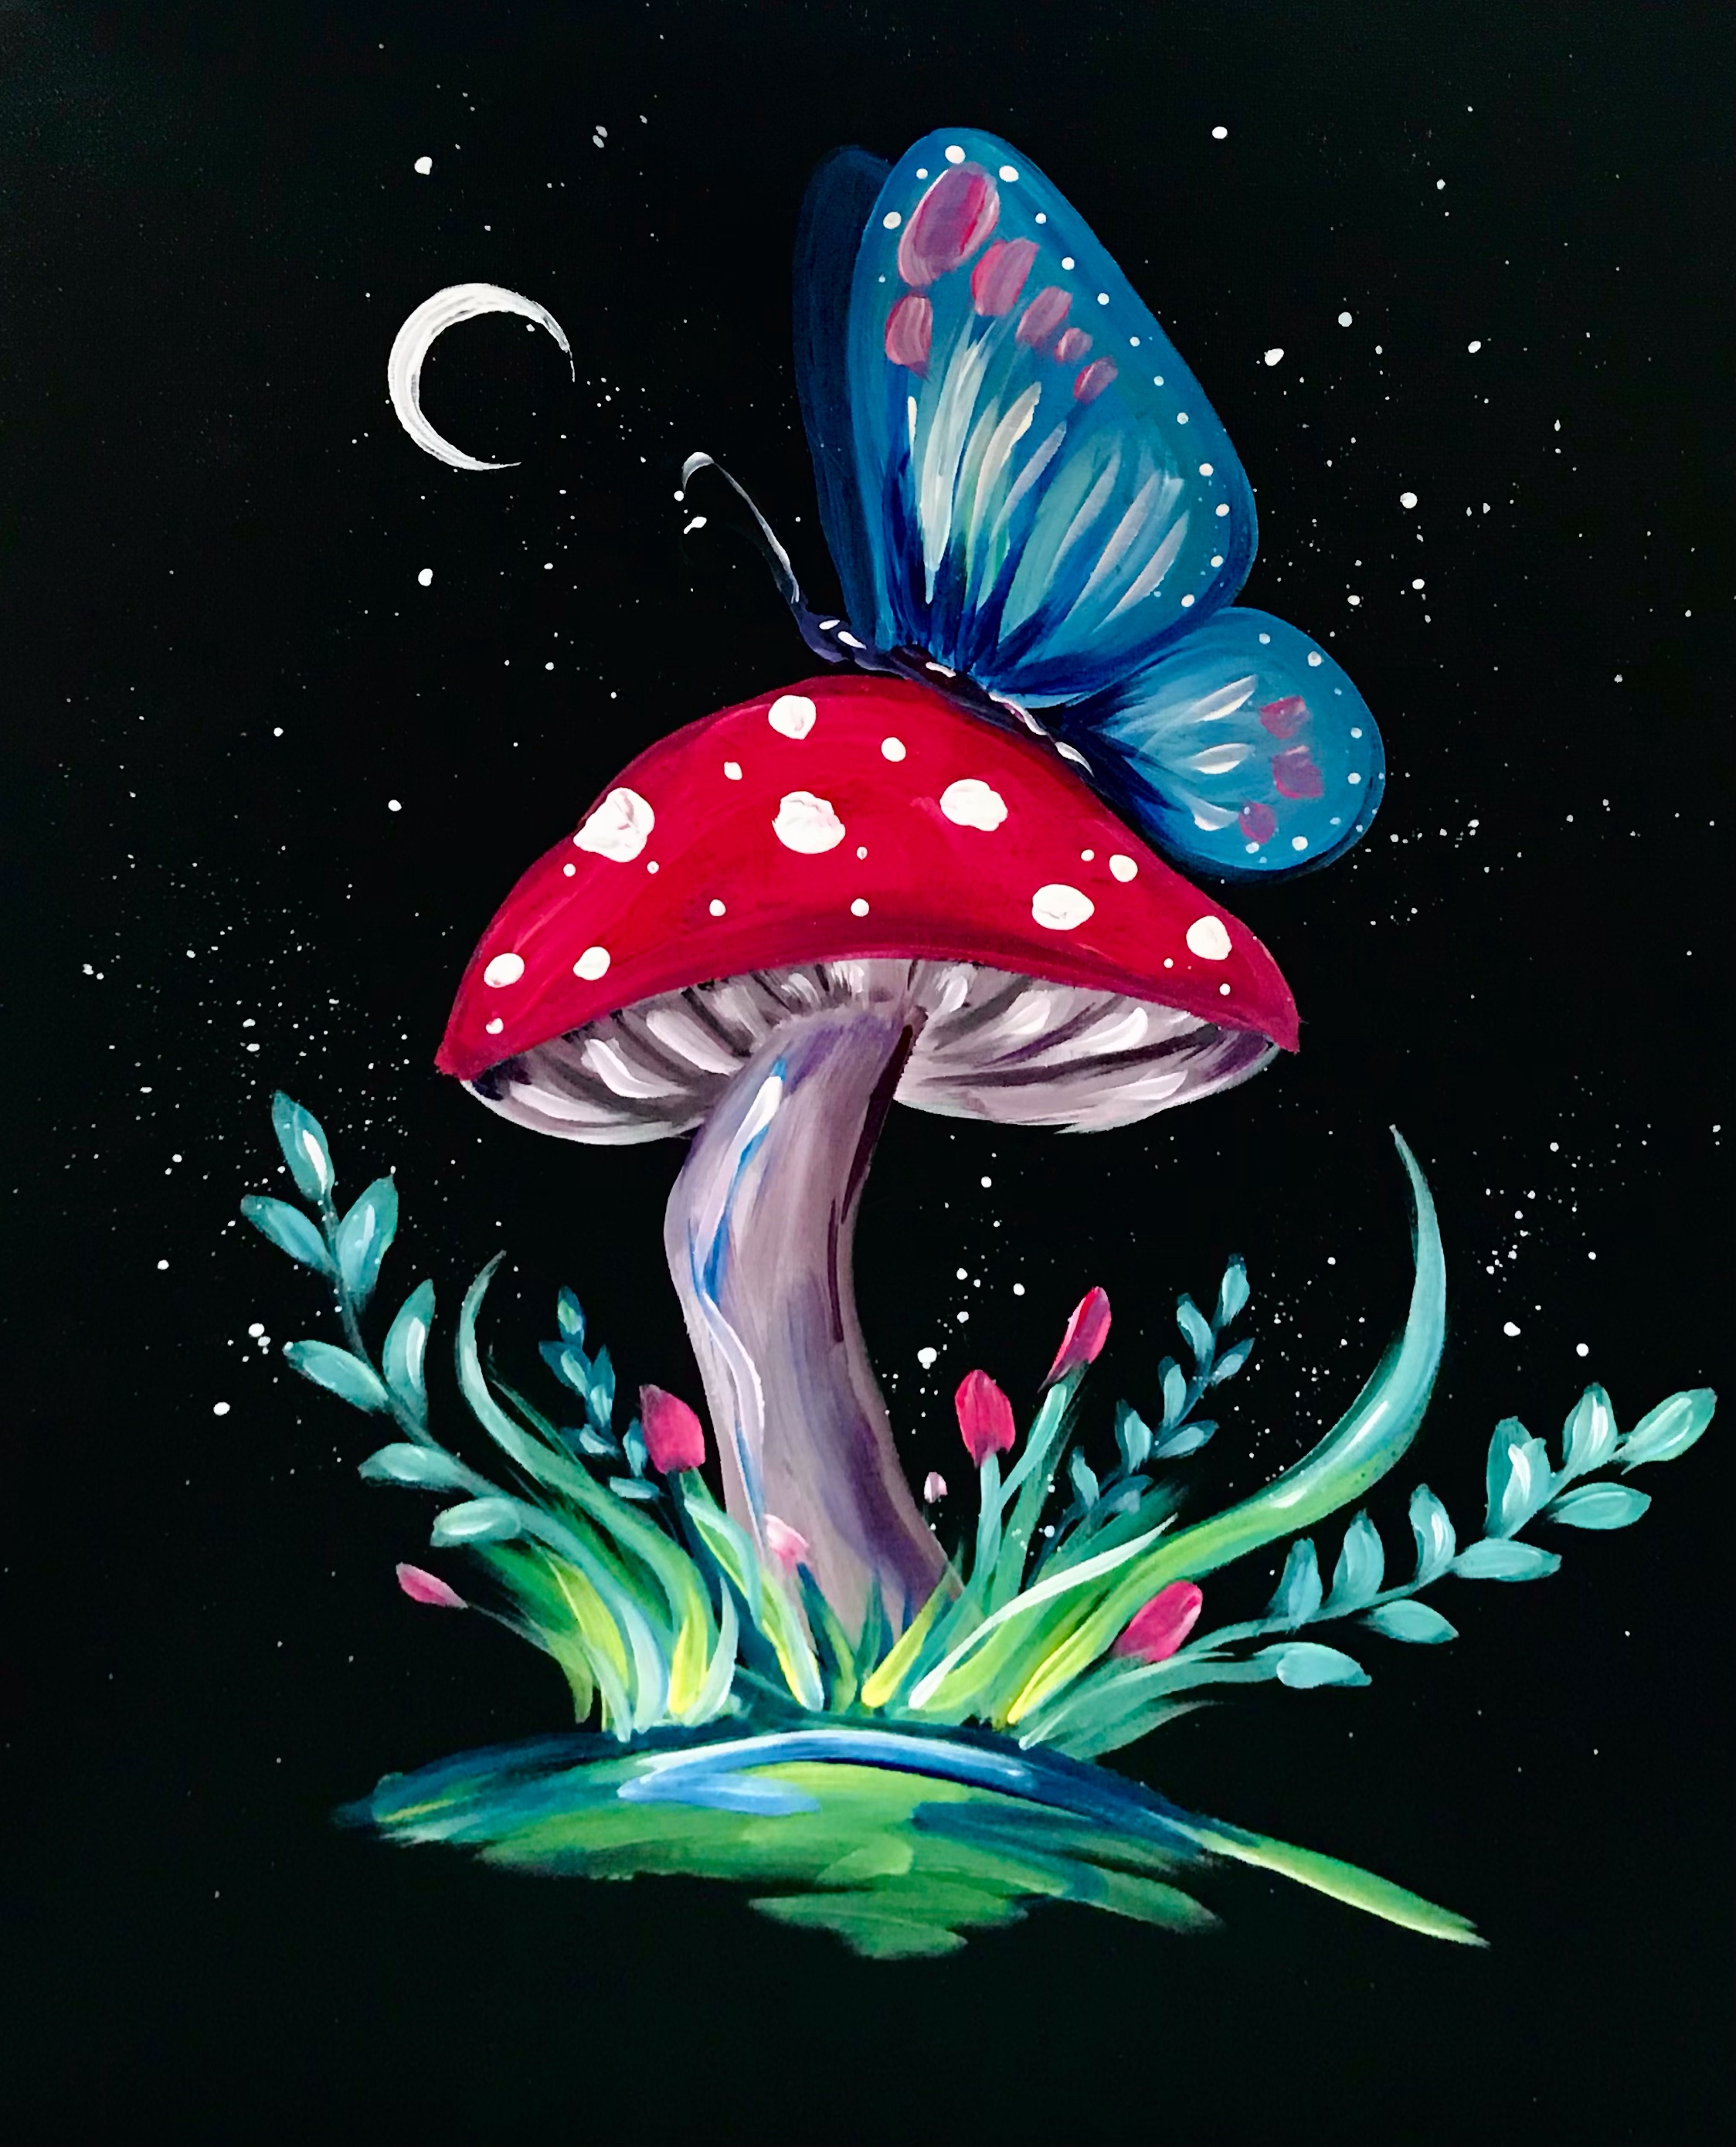 A Magic Mushroom Butterfly experience project by Yaymaker